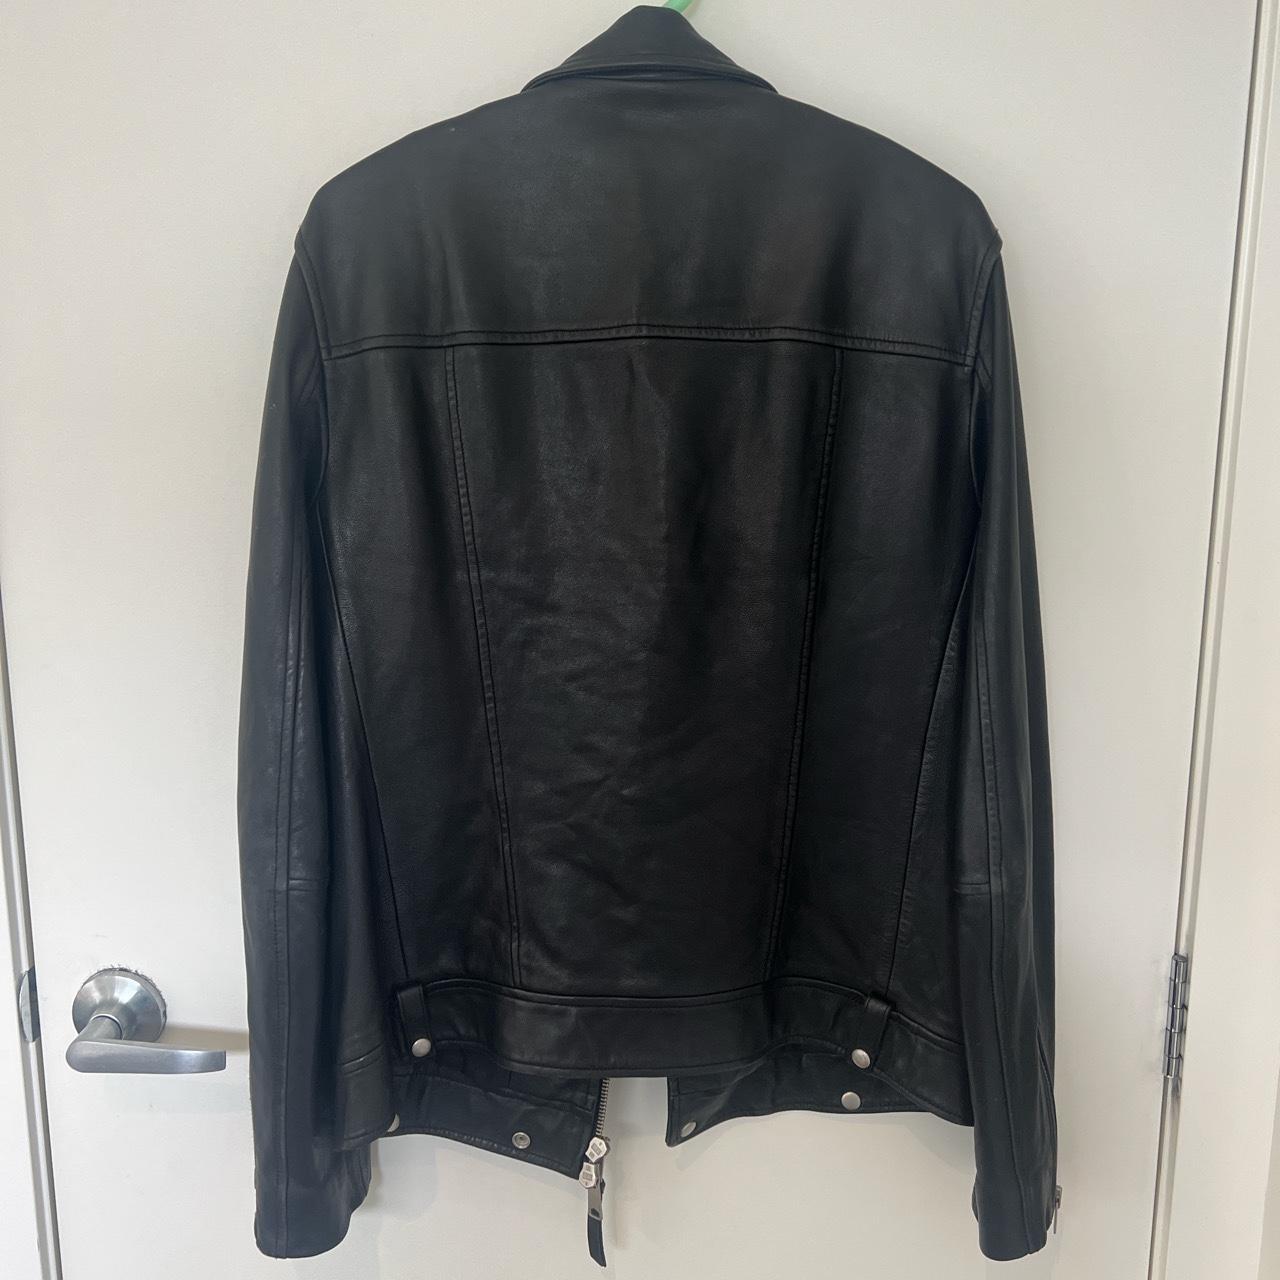 All Saints Biker Jacket Bought in London and Rarely... - Depop